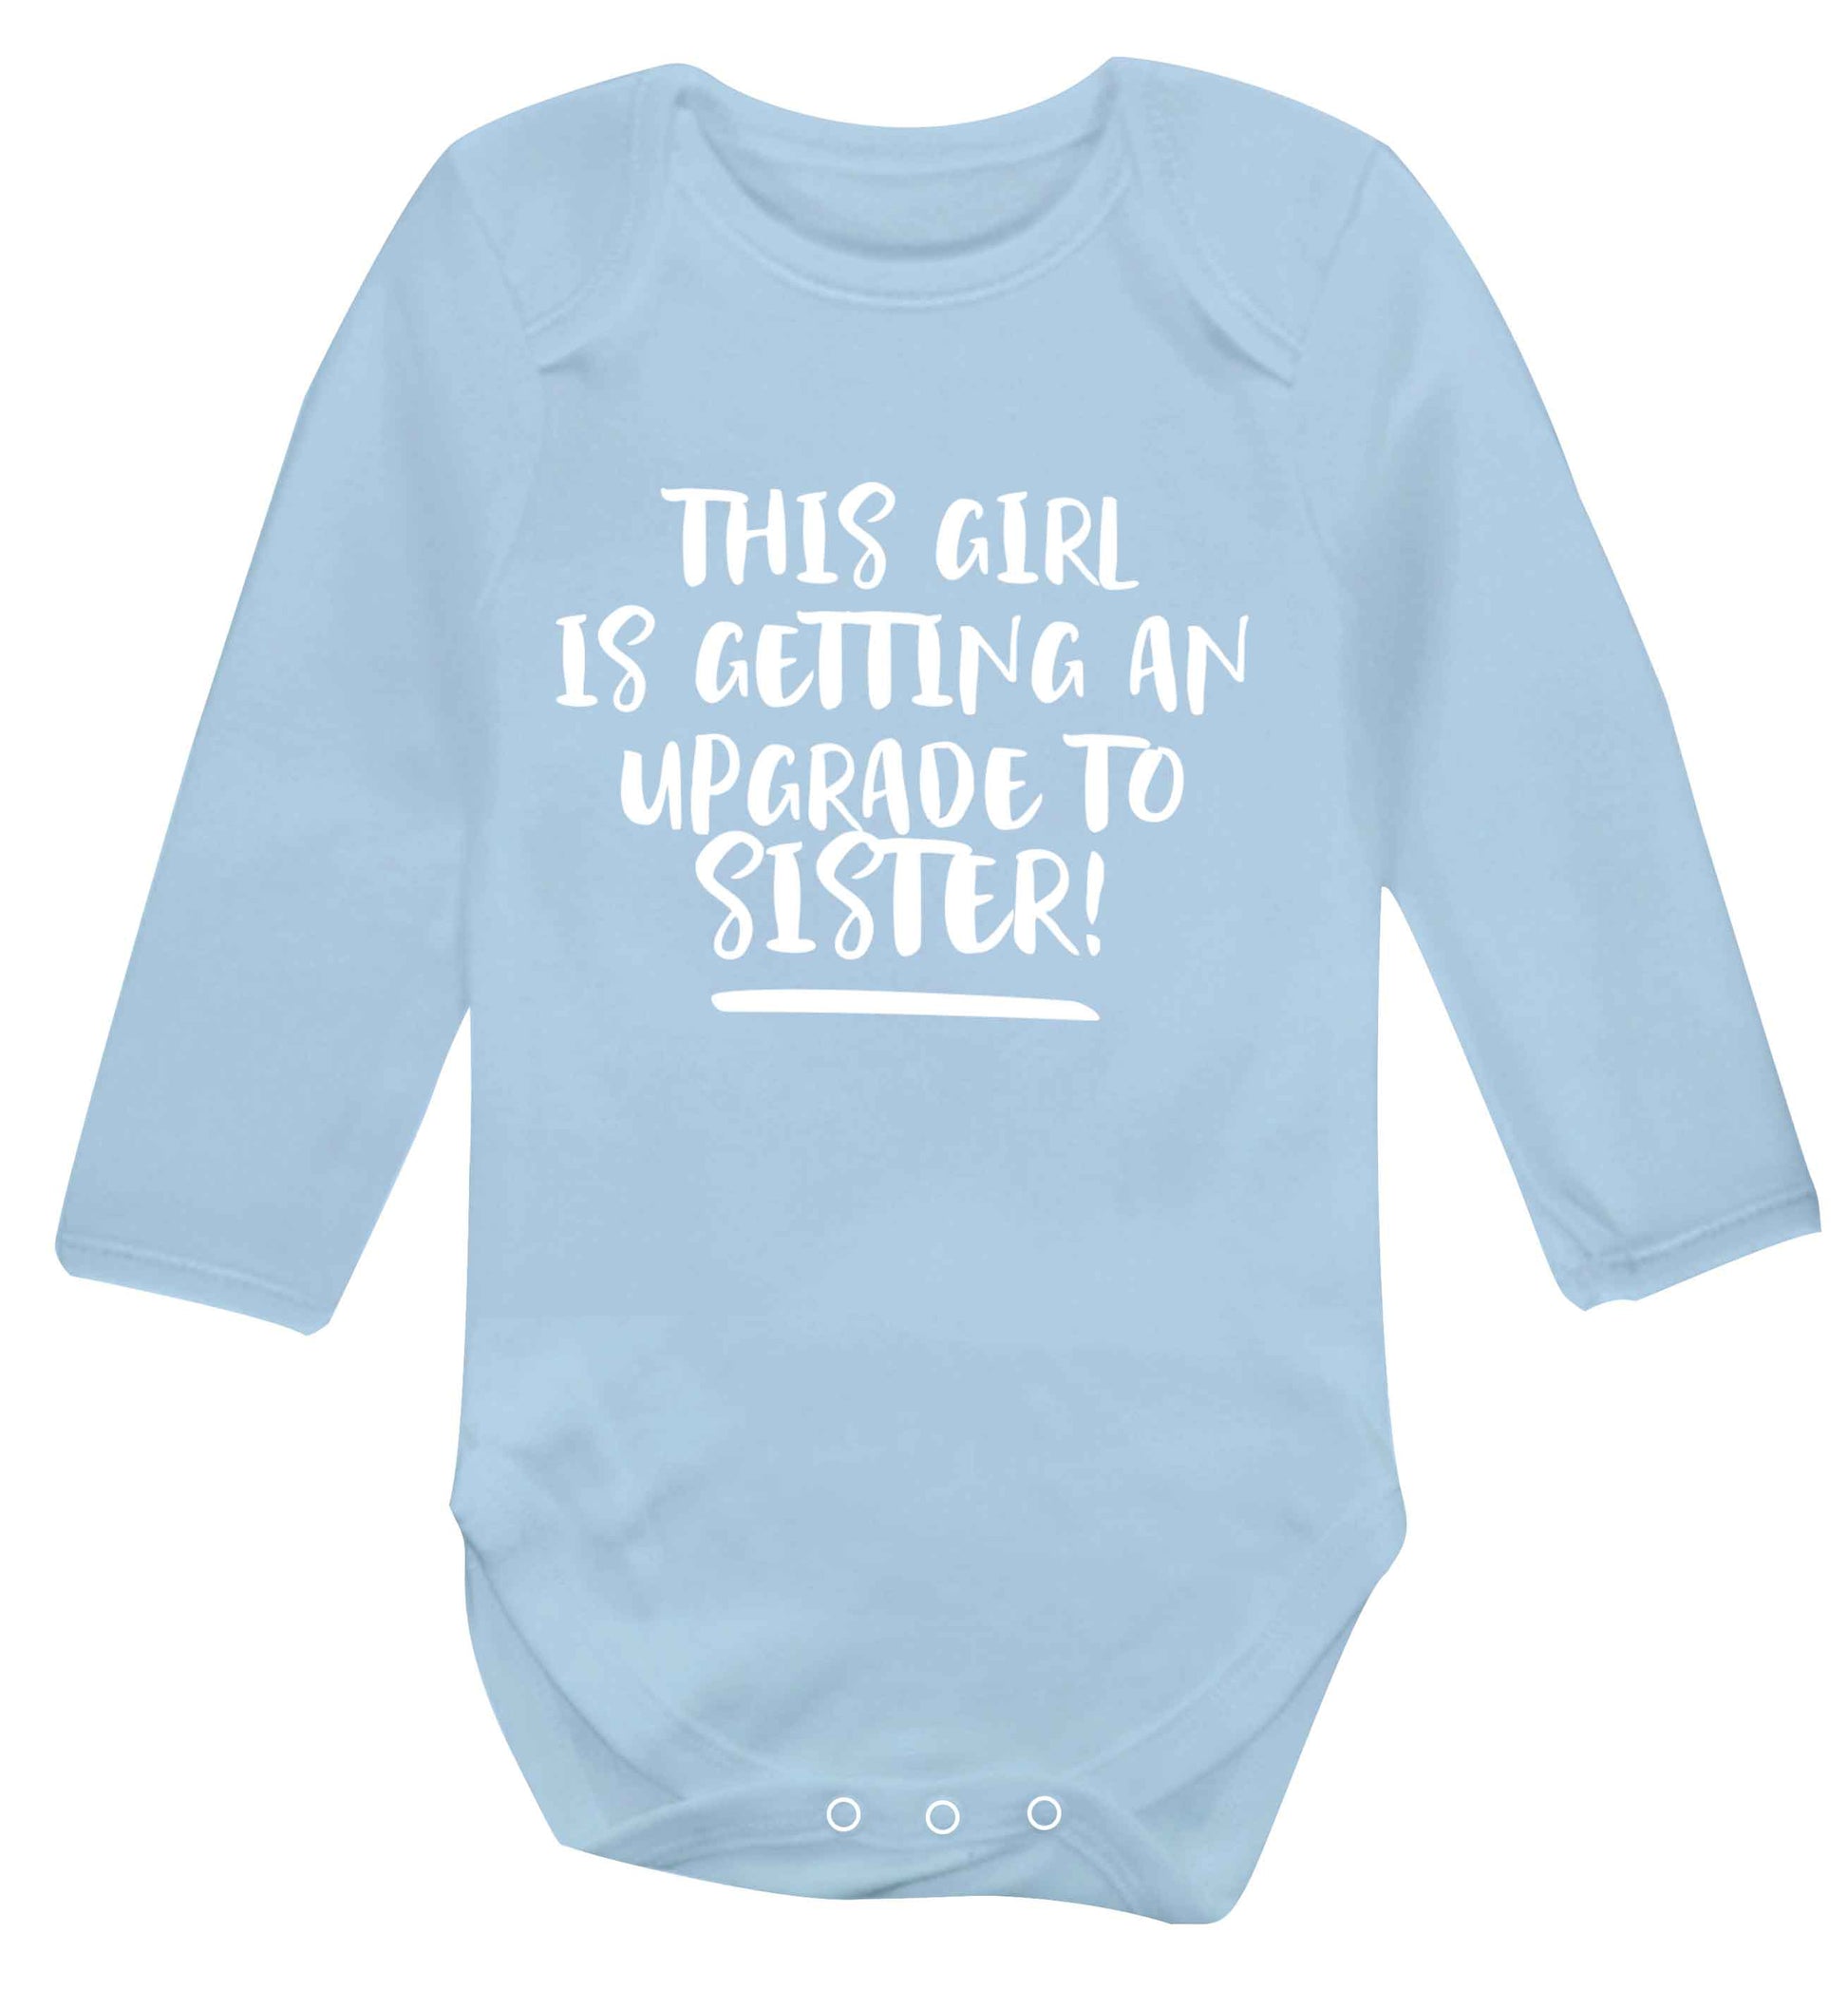 This girl is getting an upgrade to sister! Baby Vest long sleeved pale blue 6-12 months